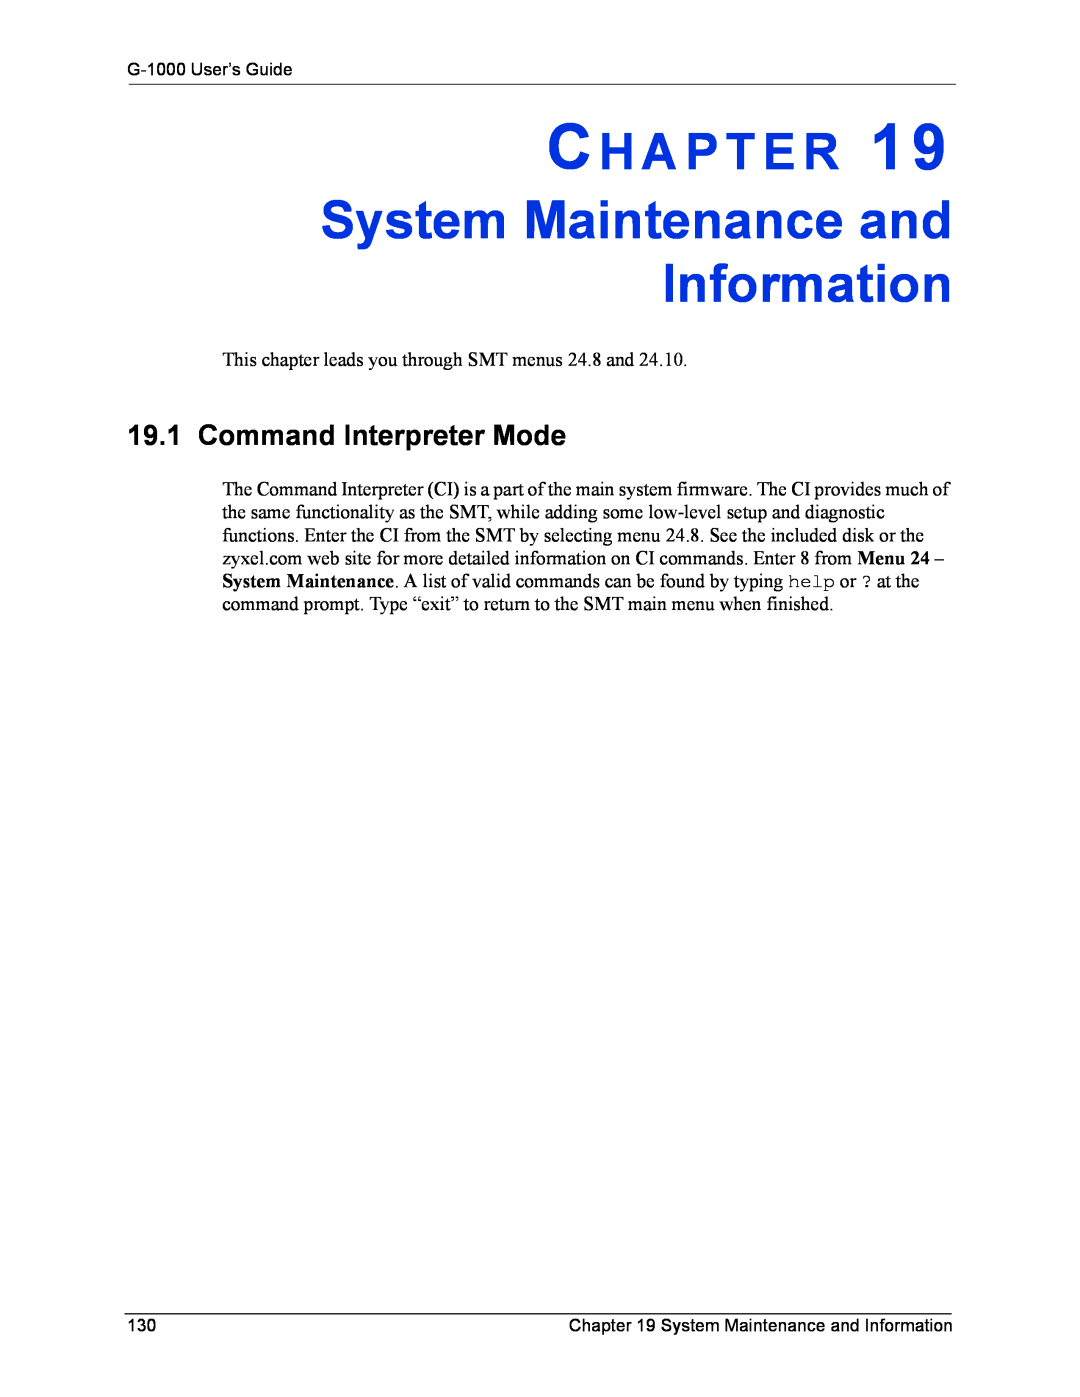 ZyXEL Communications G-1000 manual System Maintenance and Information, Command Interpreter Mode, Ch A P T E R 